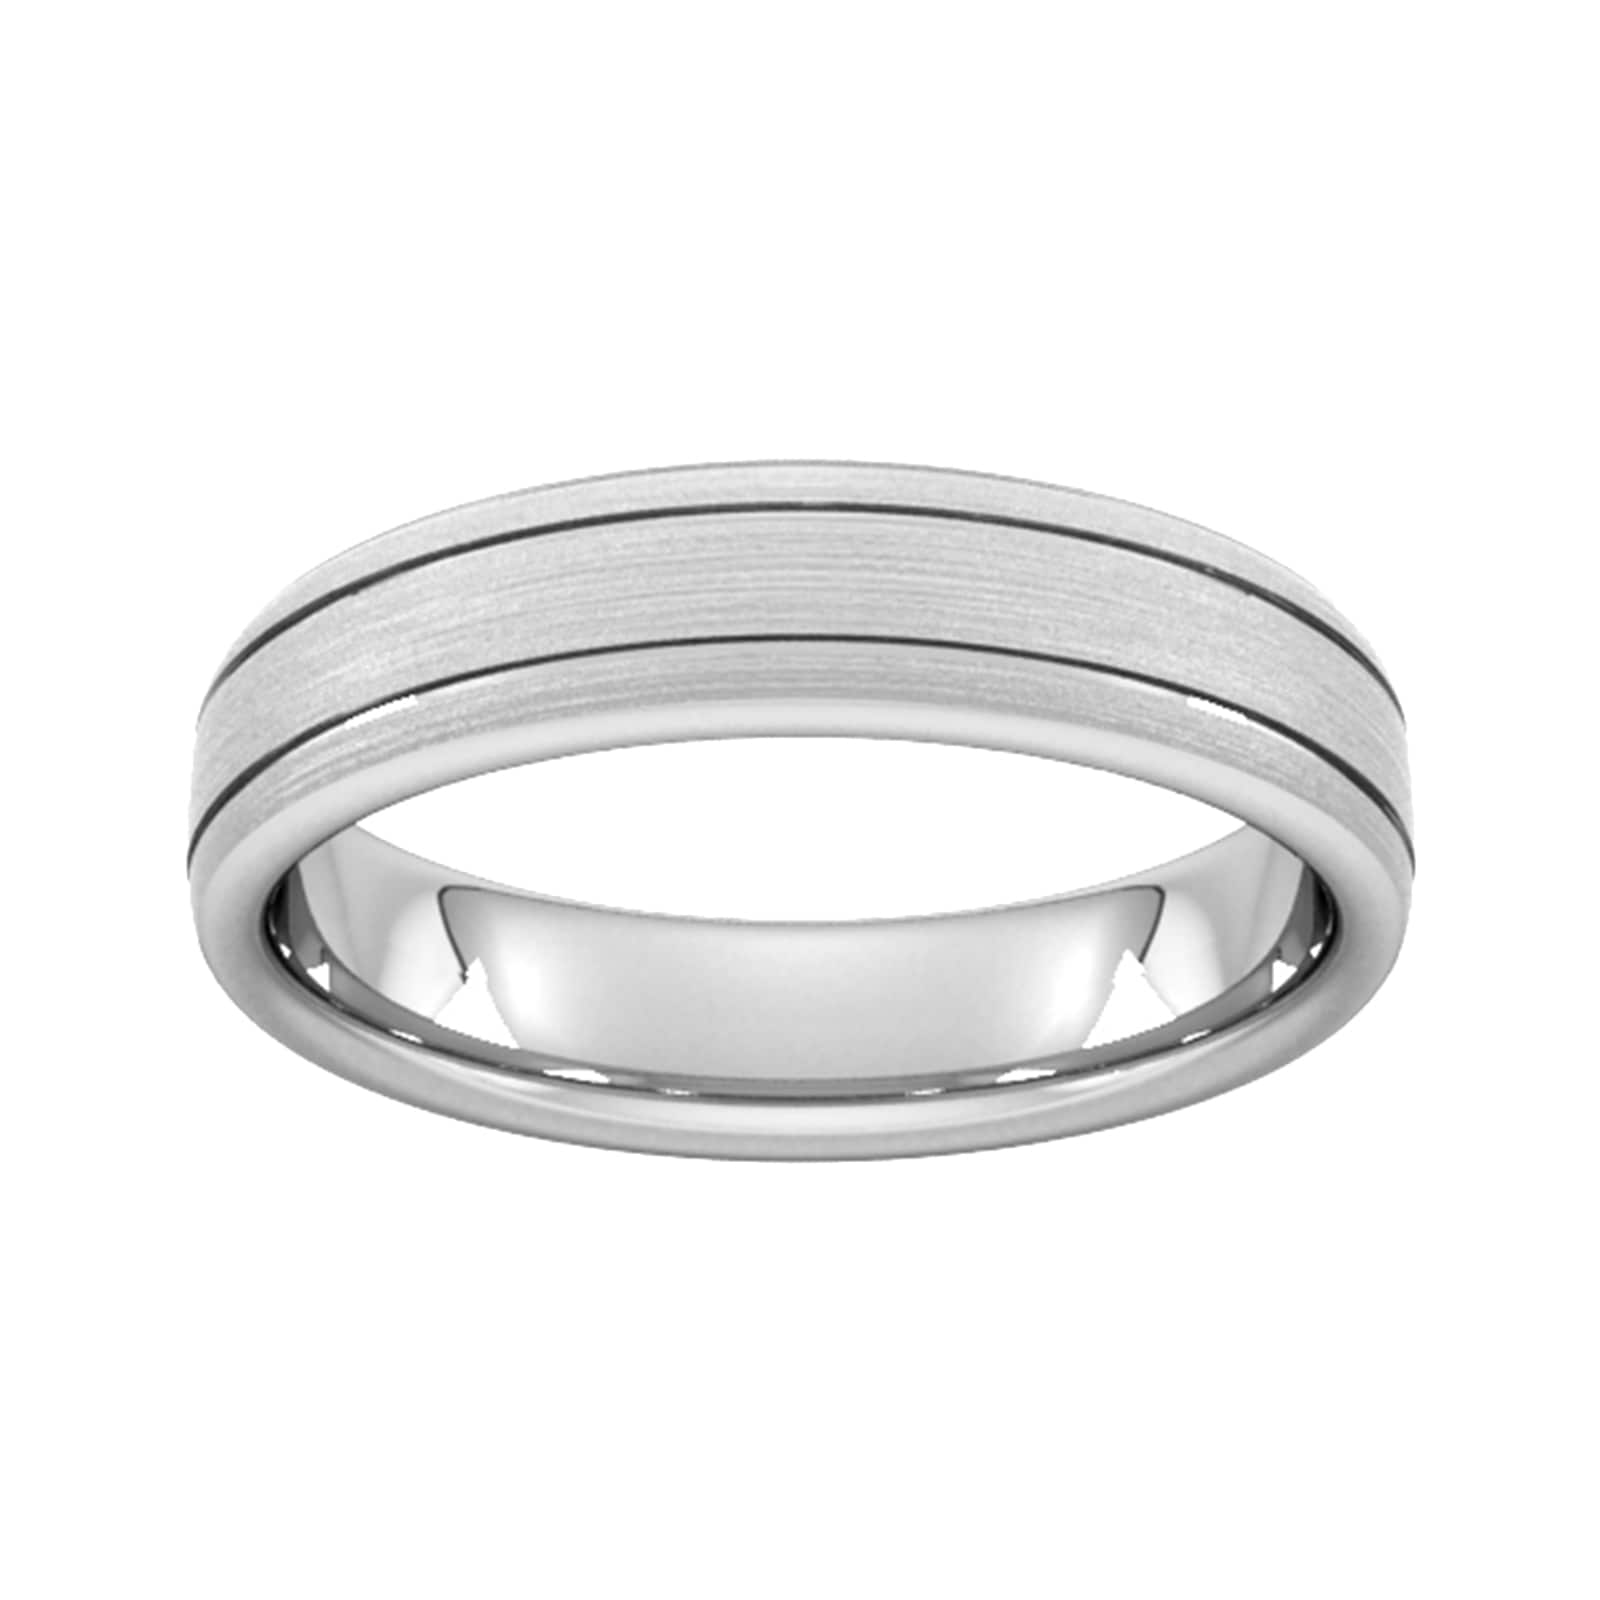 5mm Traditional Court Heavy Matt Finish With Double Grooves Wedding Ring In 18 Carat White Gold - Ring Size X